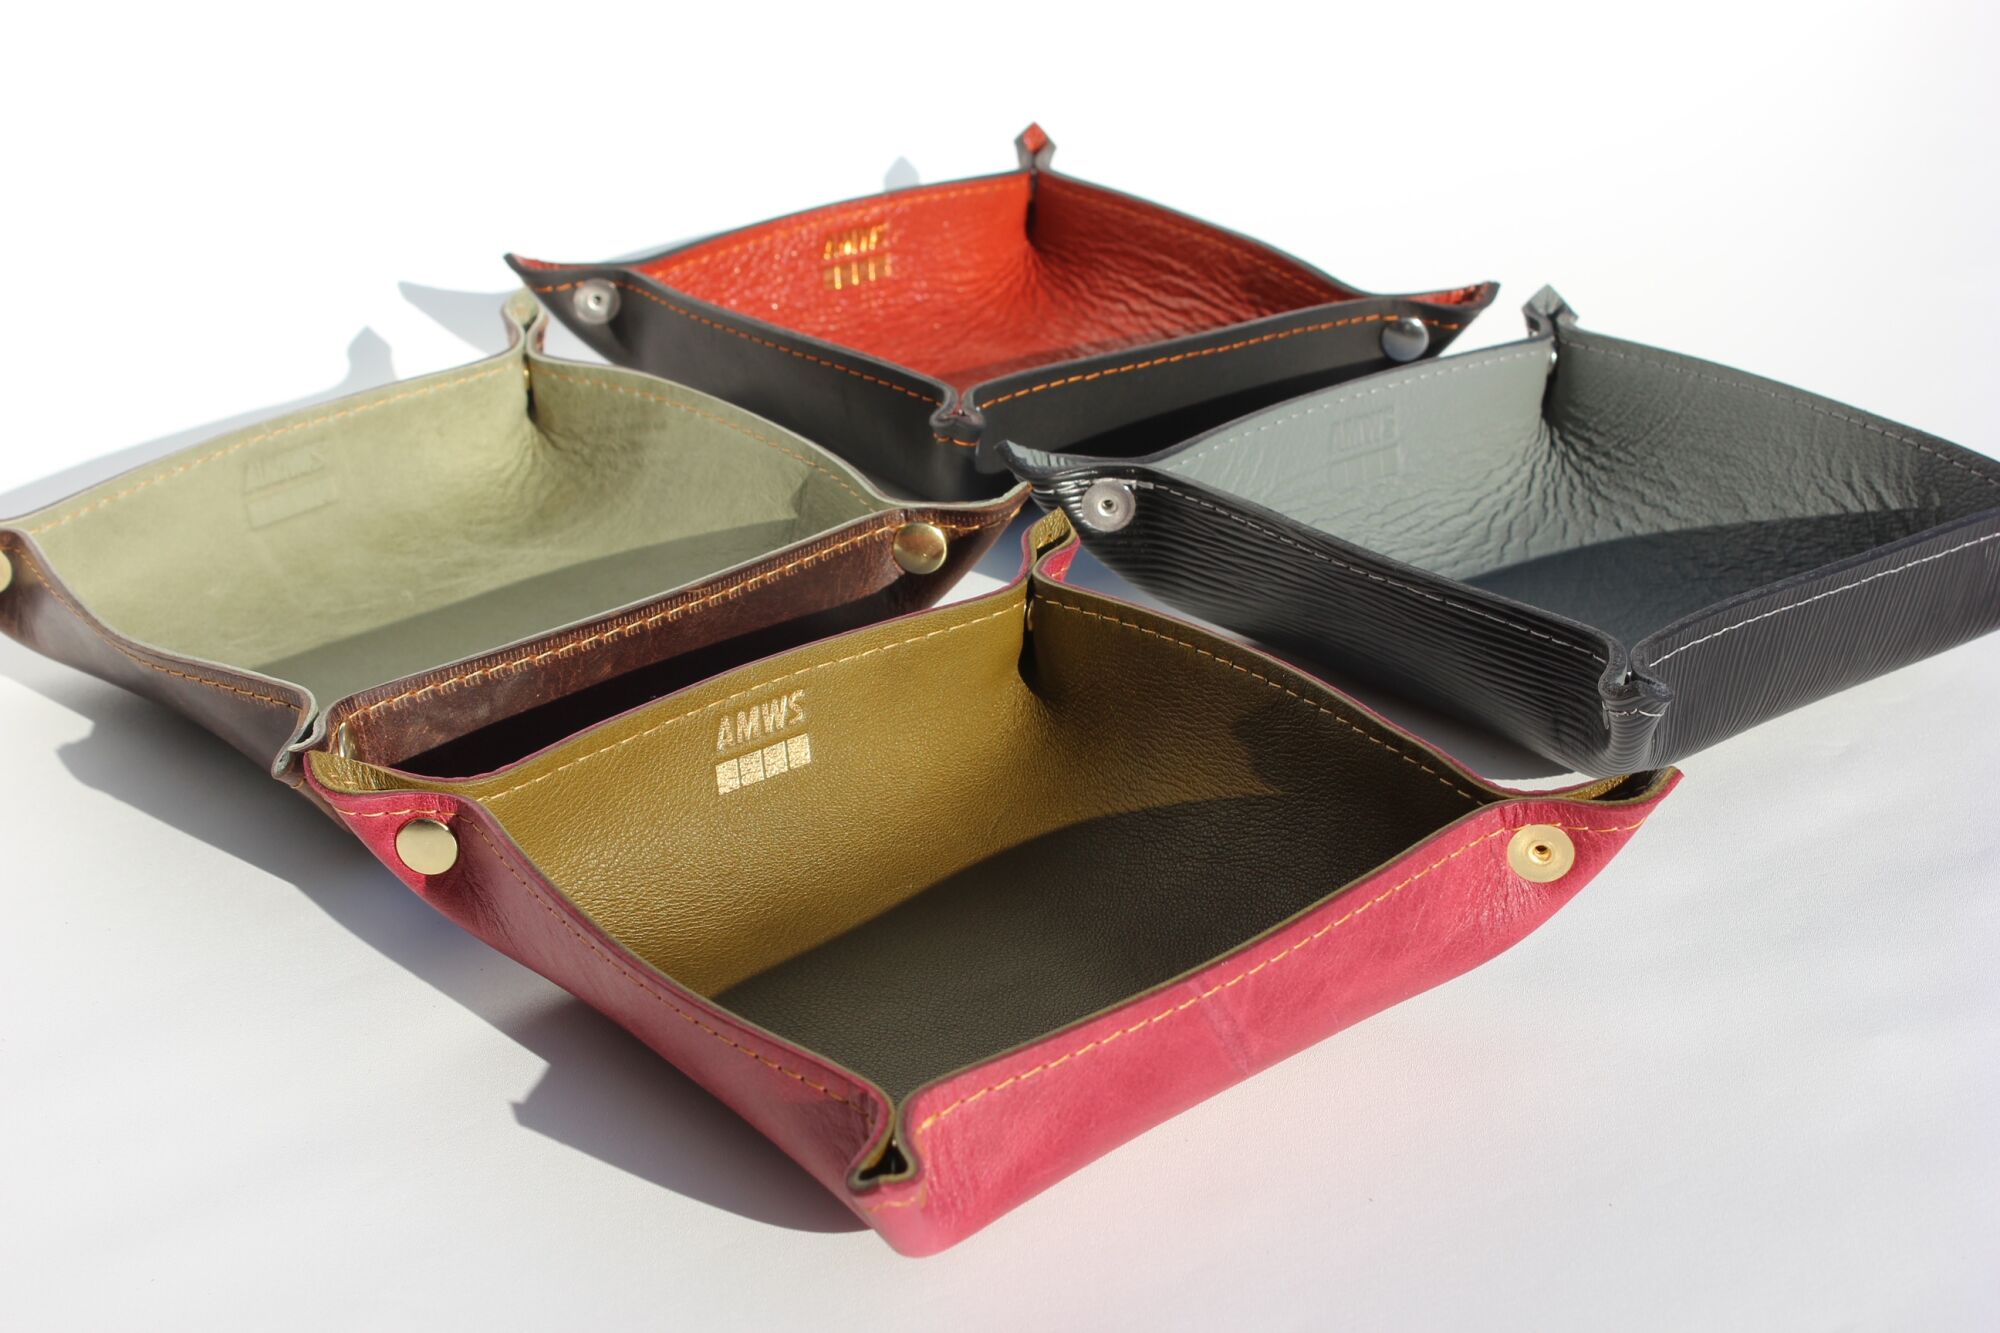 Coveted for issue 11 of Image magazine-- AMWS leather tray.